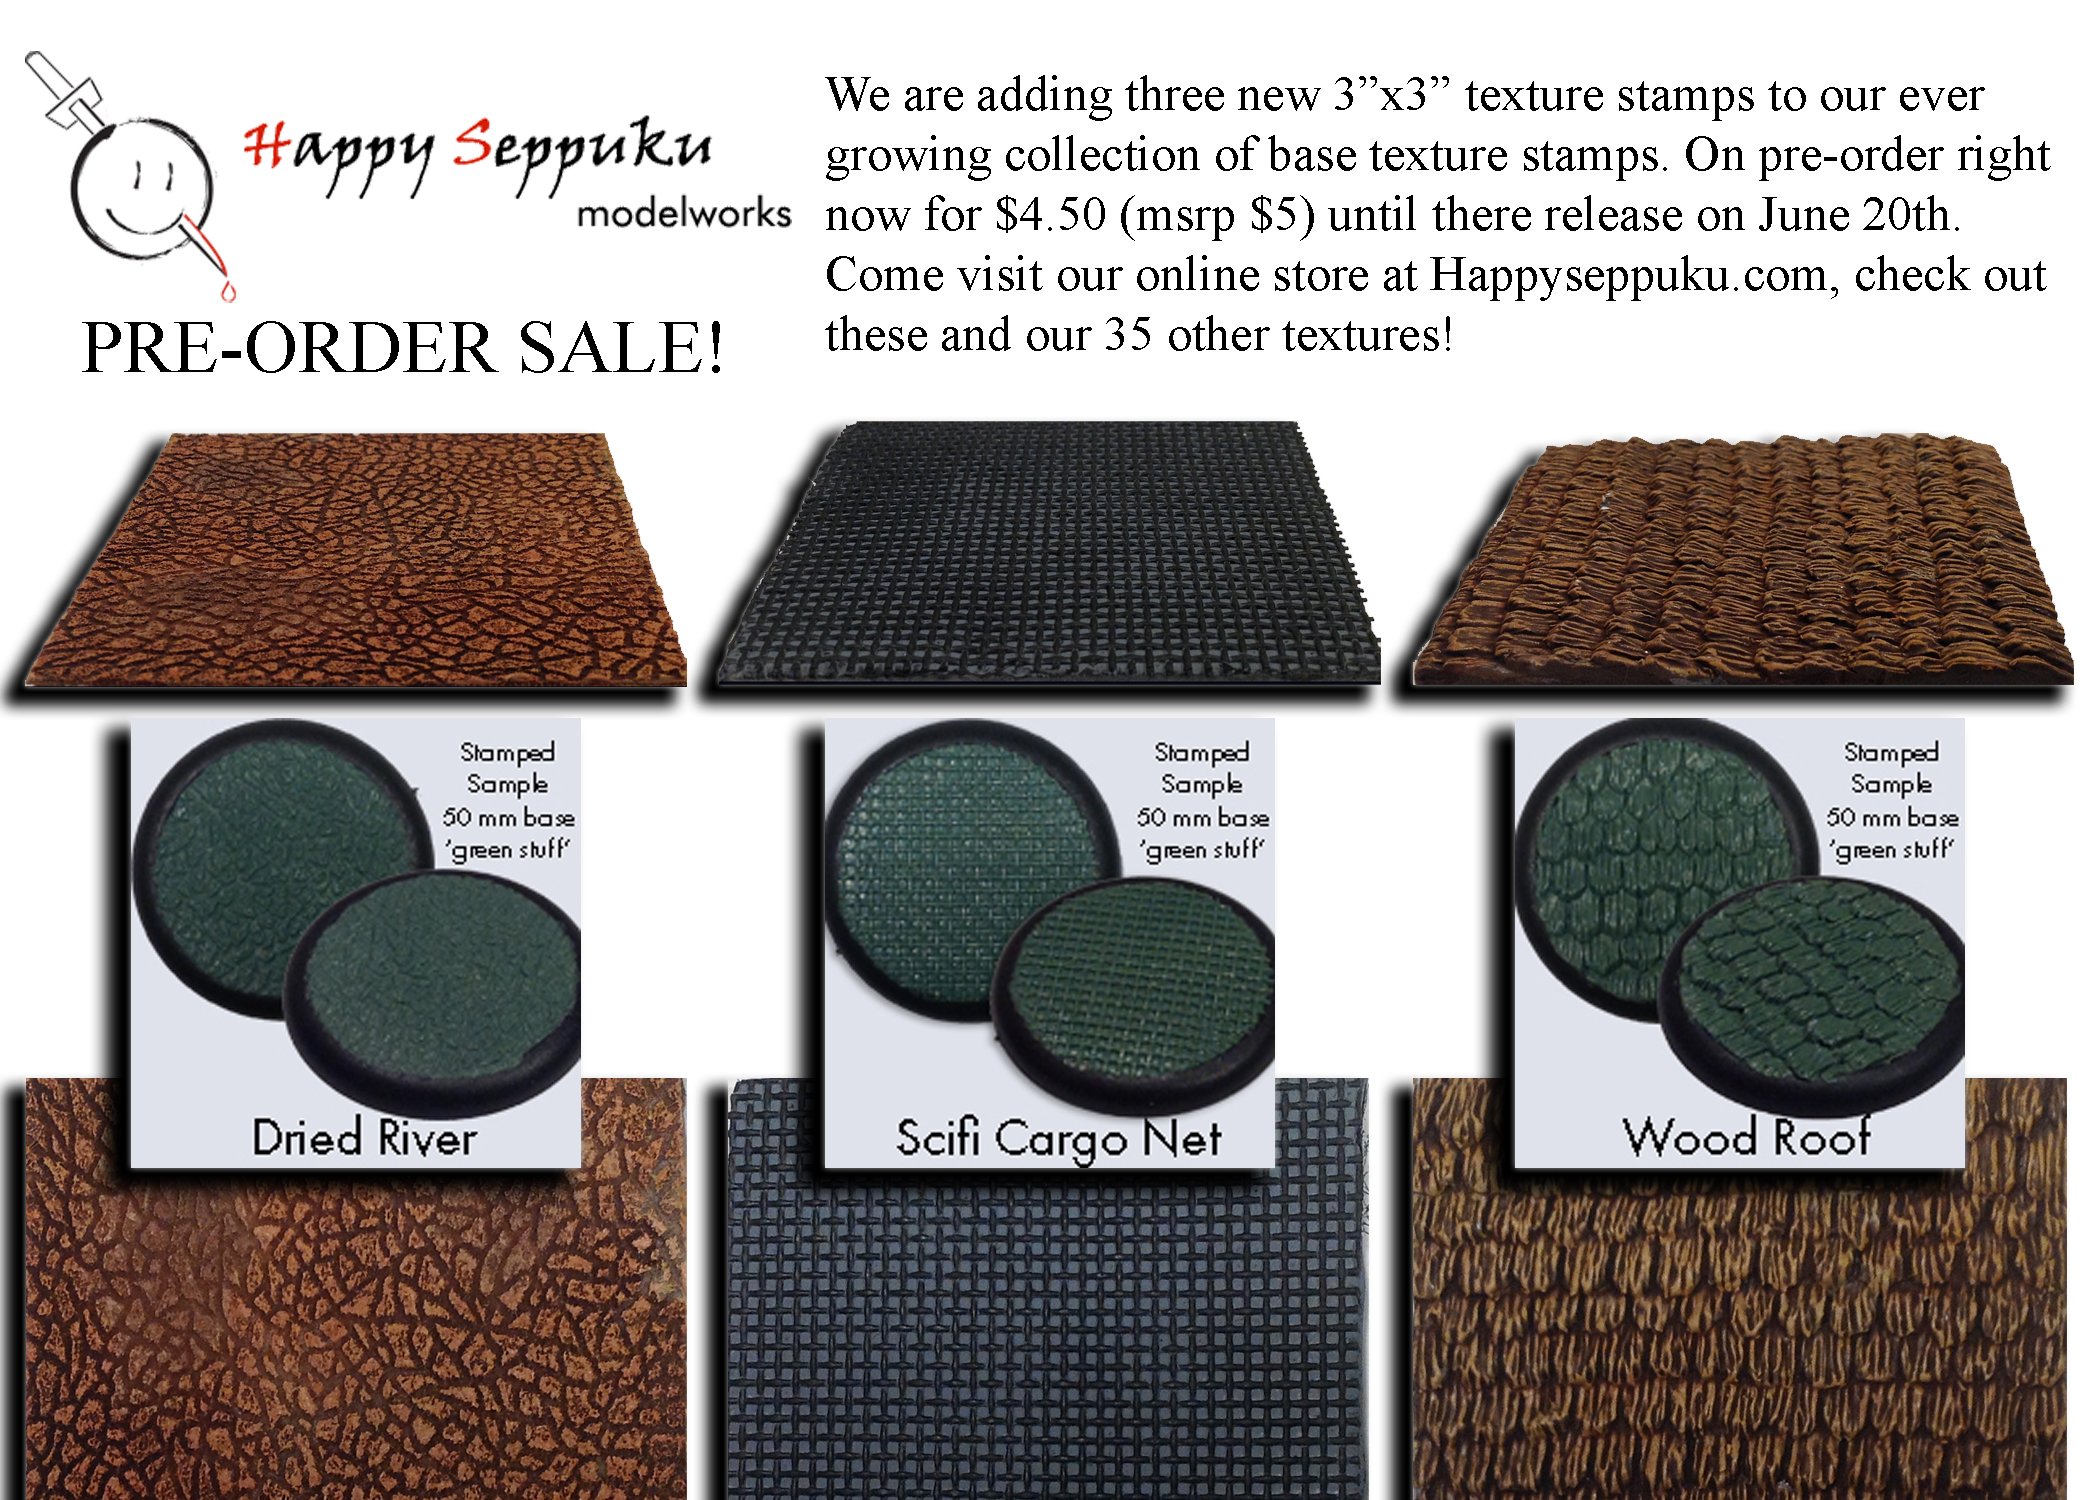 Three New Texture Stamps from HAPPY SEPPUKU